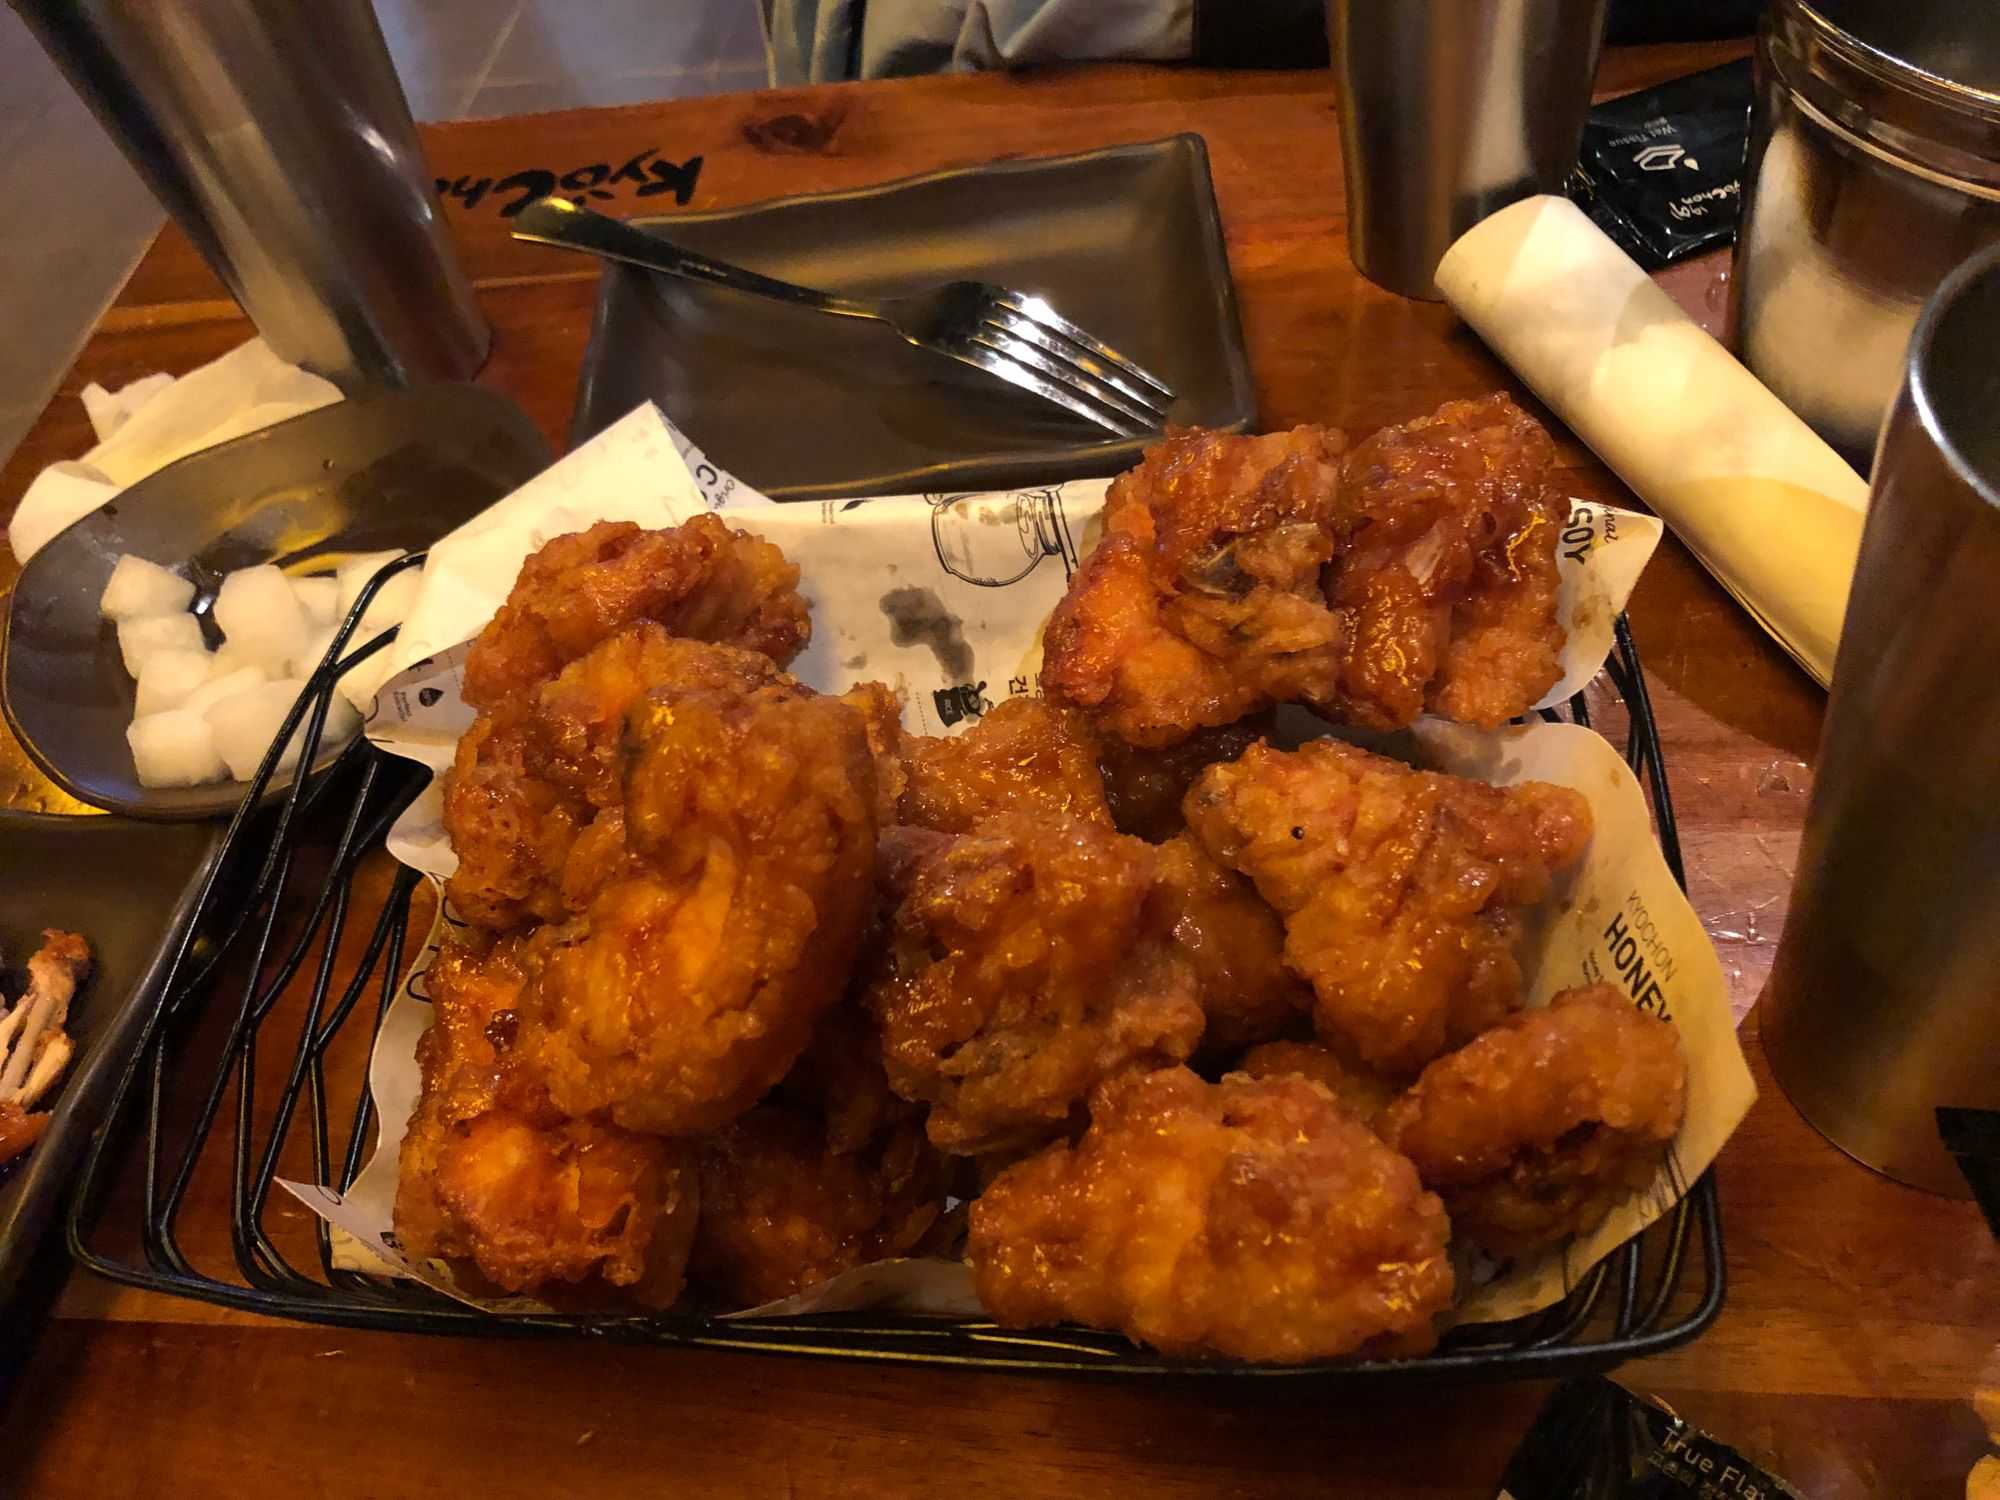 Fried Chicken (Image by author)